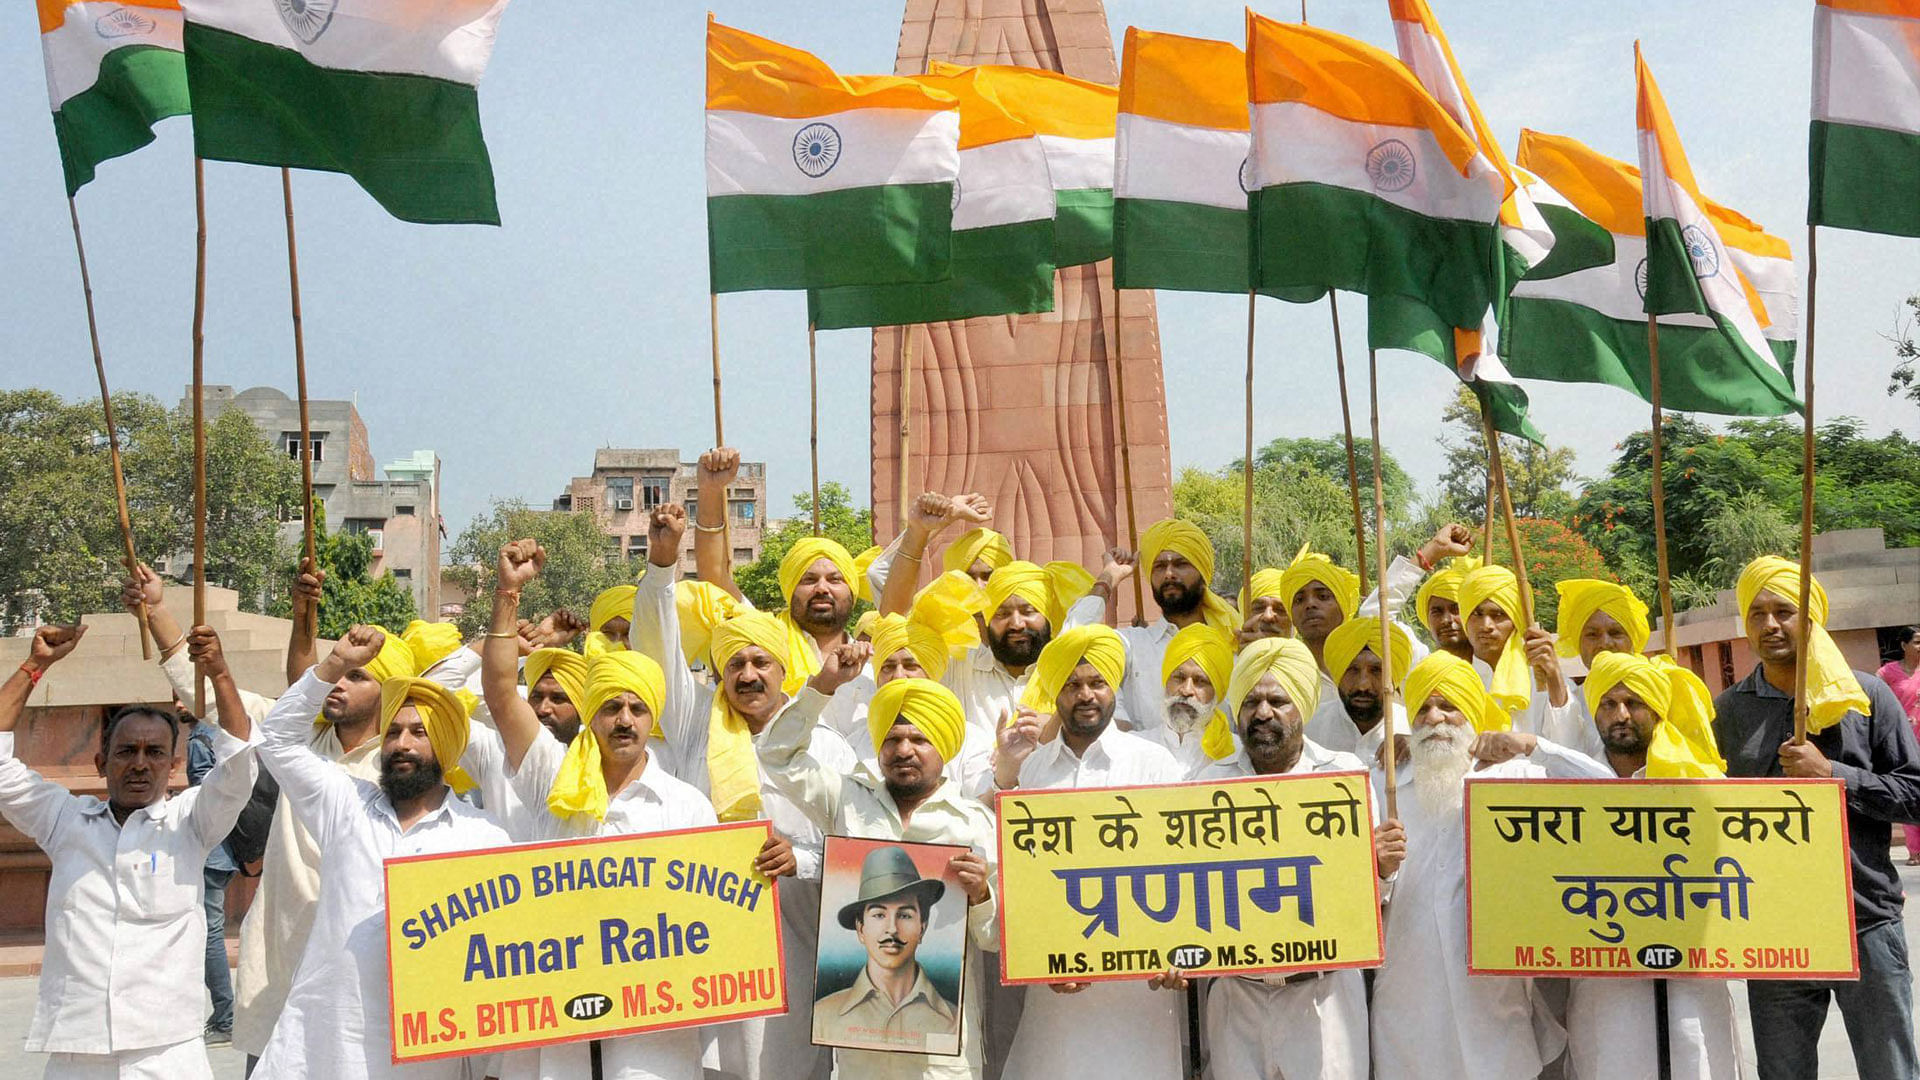 People raising patriotic slogans and paying tributes to Bhagat Singh on his 108th birth anniversary at Jallianwala Bagh in Amritsar, September 27, 2015. (Photo: PTI)